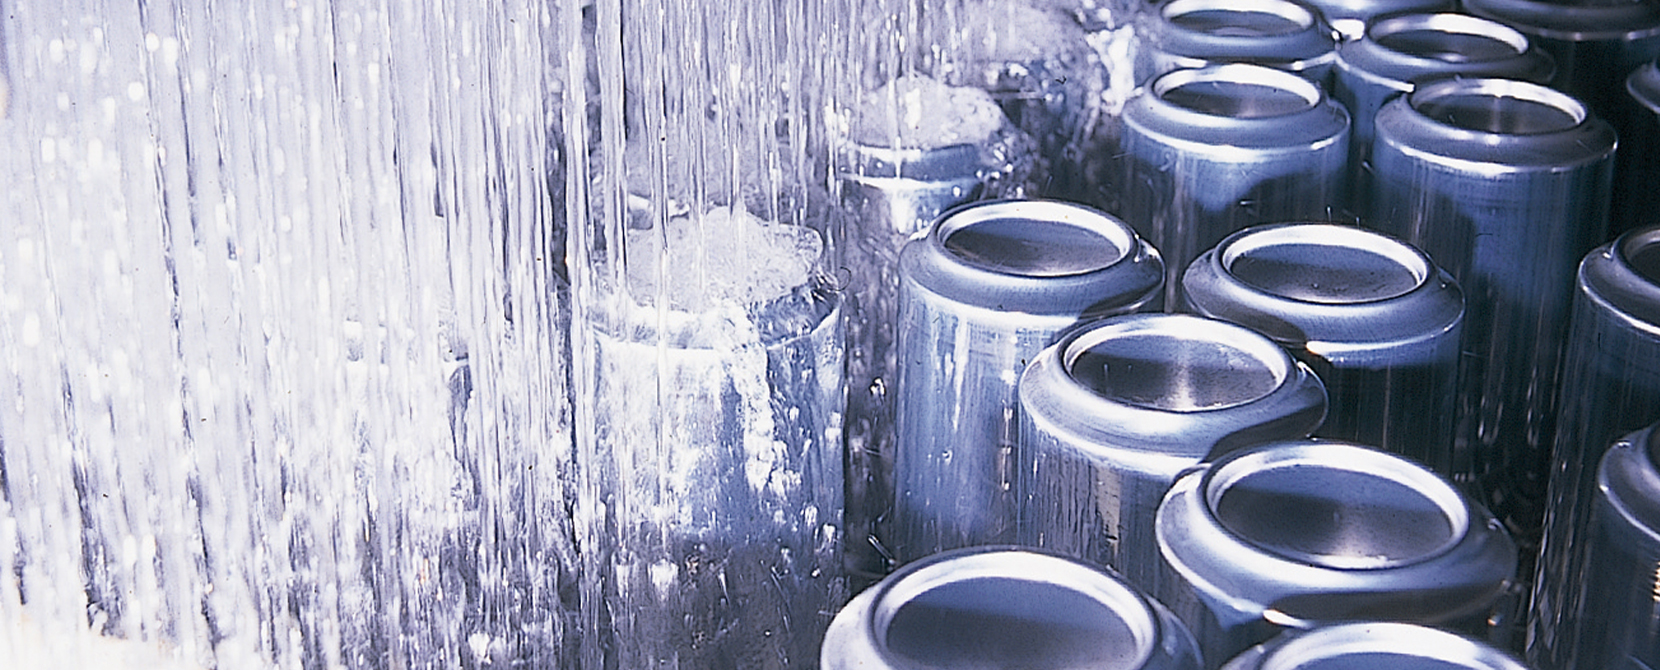 Cleaning and rust preventive treatment for aluminum beverage cans